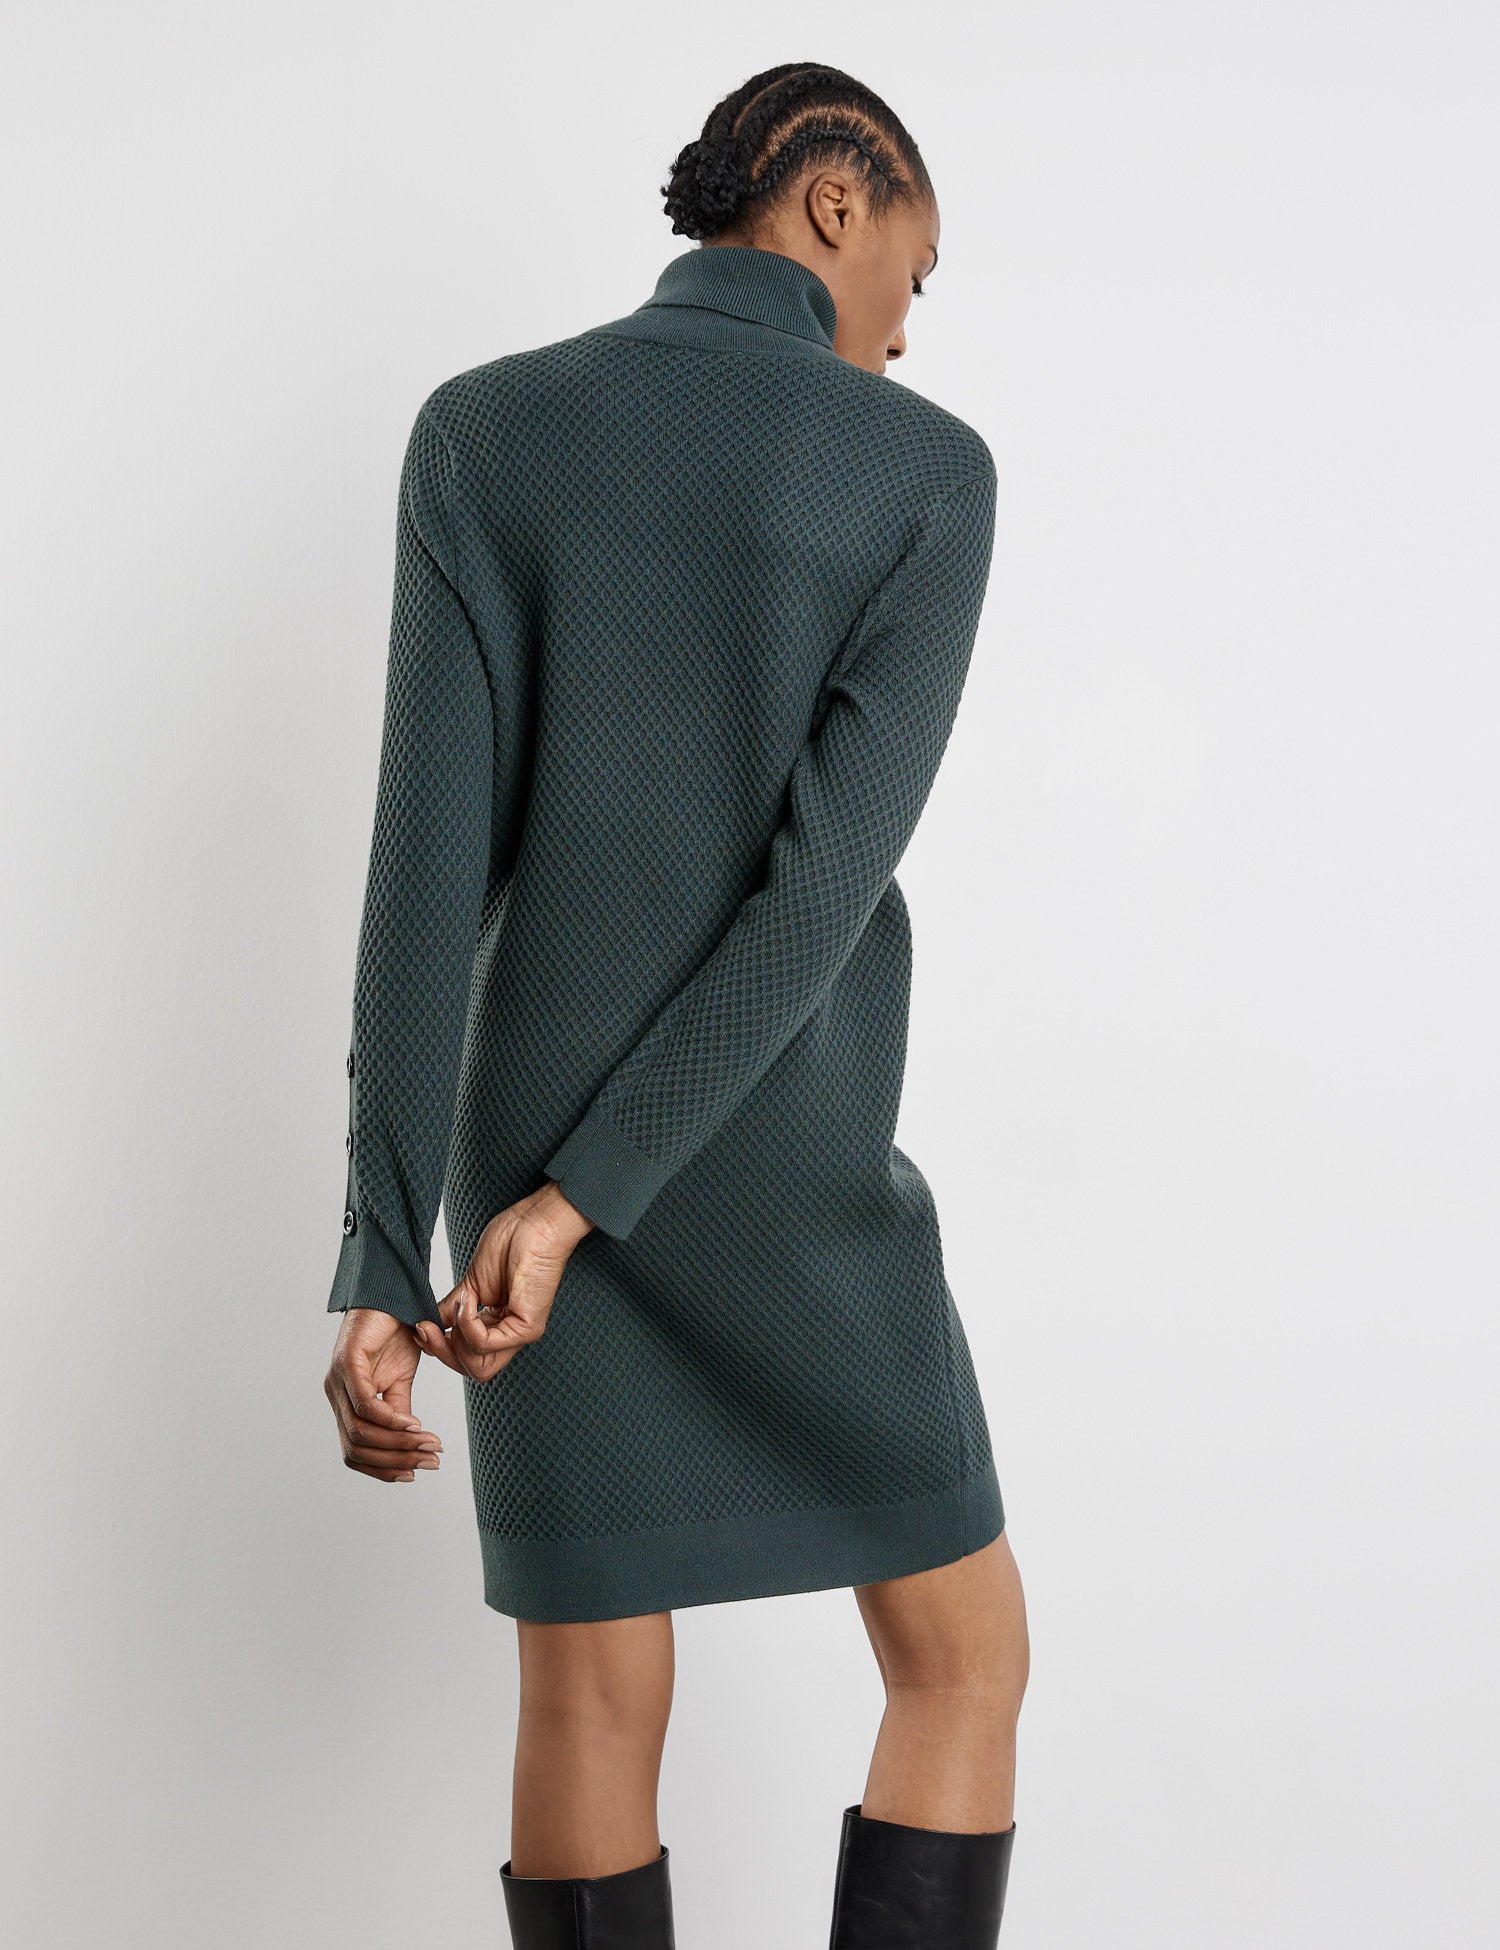 Knit Dress With A Polo Collar And A Button Detail On The Sleeves_280106-35713_50939_06